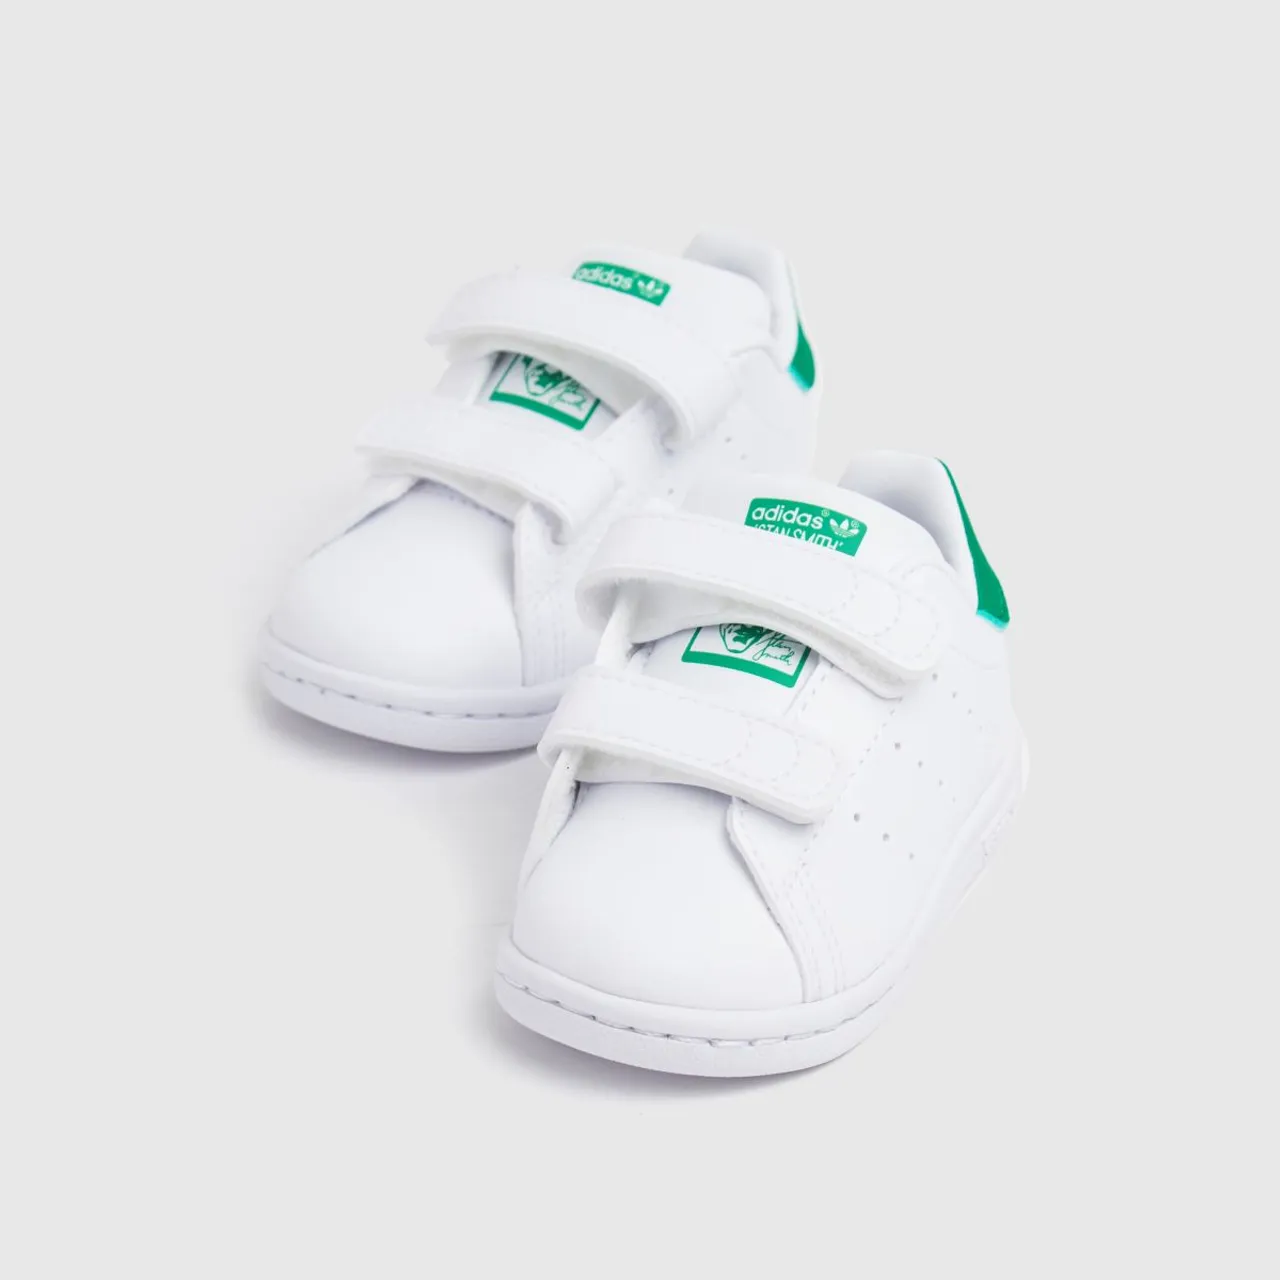 Adidas White & Green Stan Smith 2v Toddler Trainers